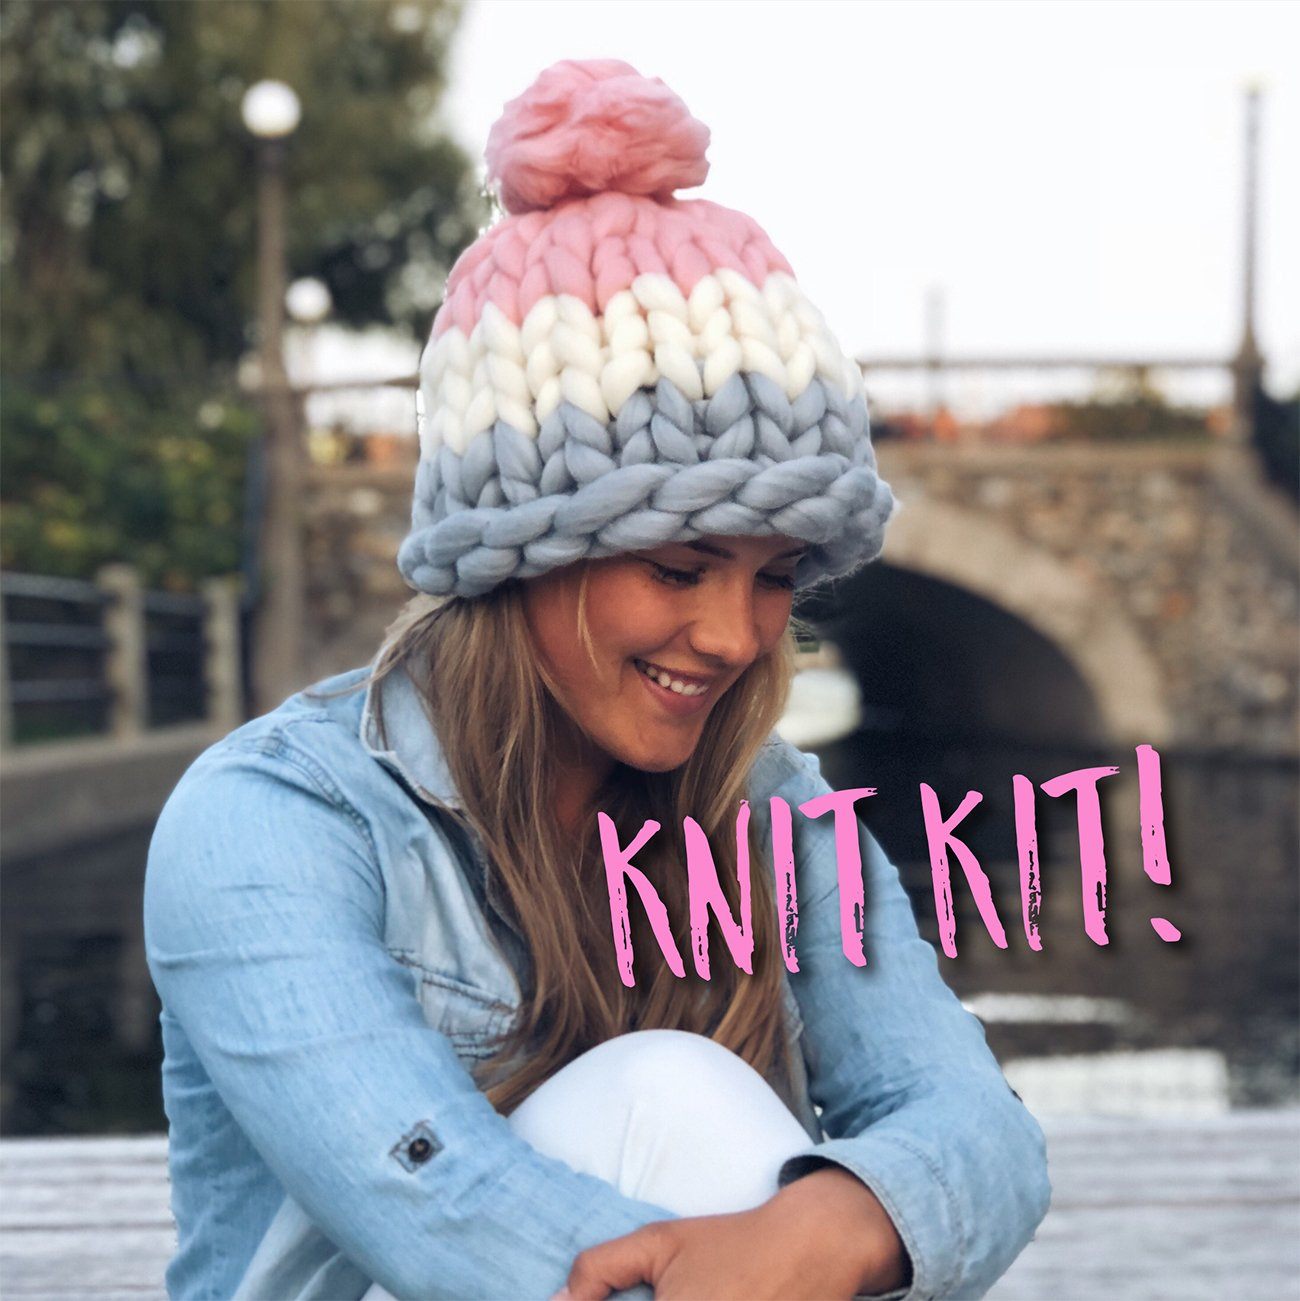 DIY Winter Accessories Triple Set Knit Kit. Includes Bulky Superfine Merino  Wool Yarn, Printed Pattern, Pom-Pom, Rim Tag. Soft, Cozy, Great for Gifts